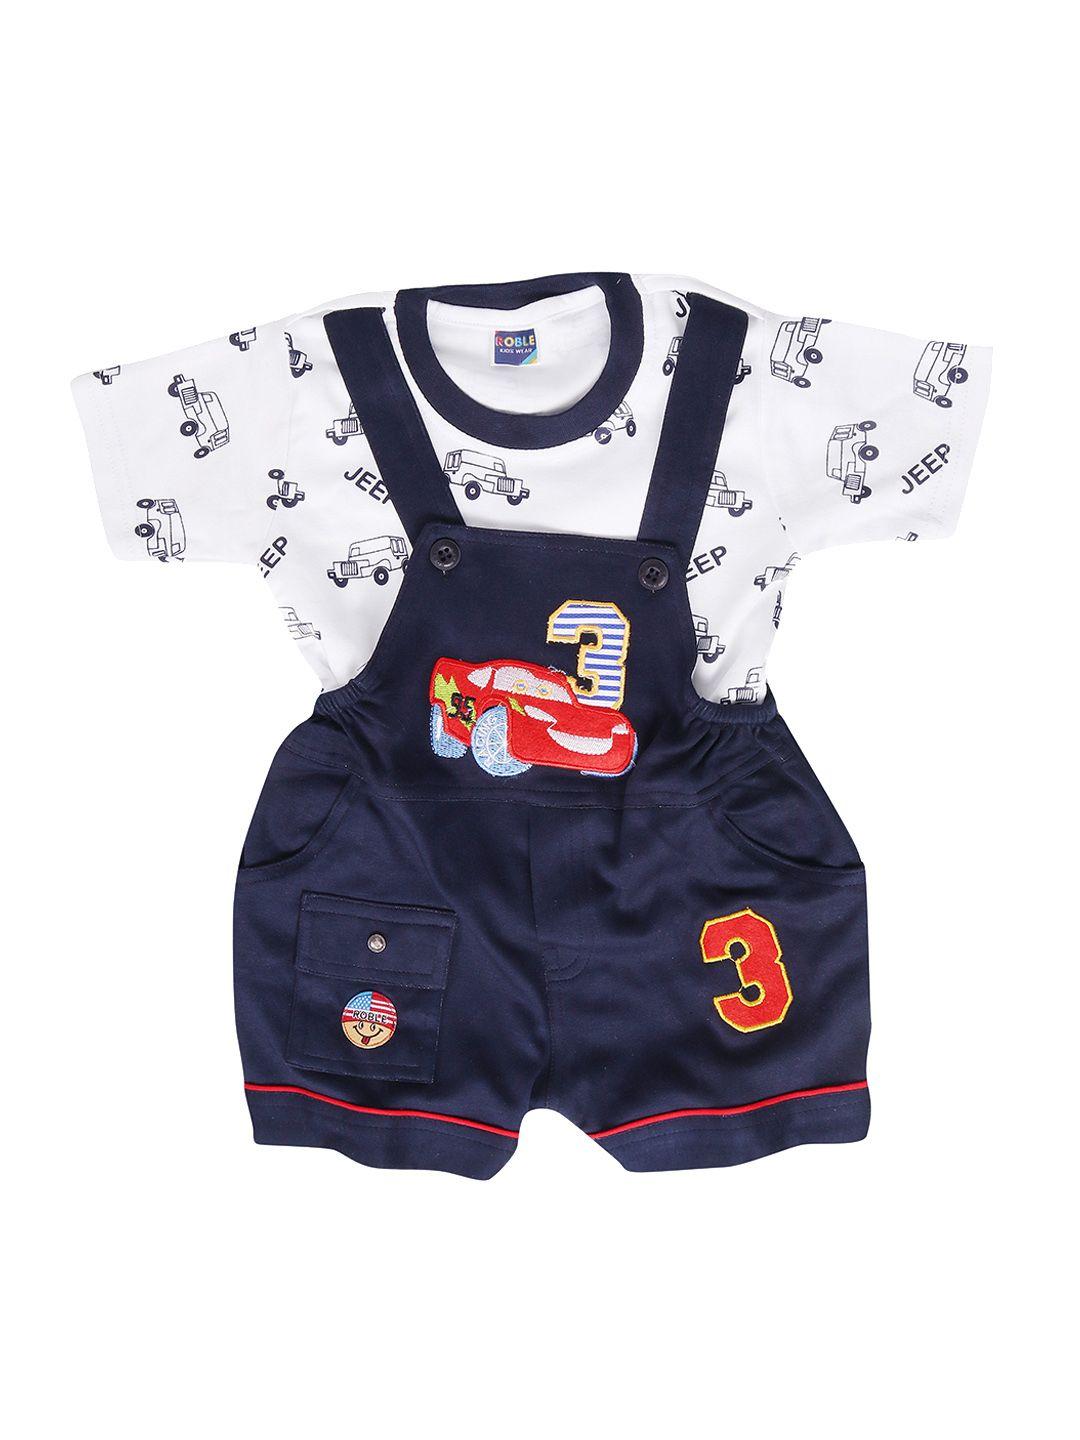 baesd infants embroidered pure cotton dungaree